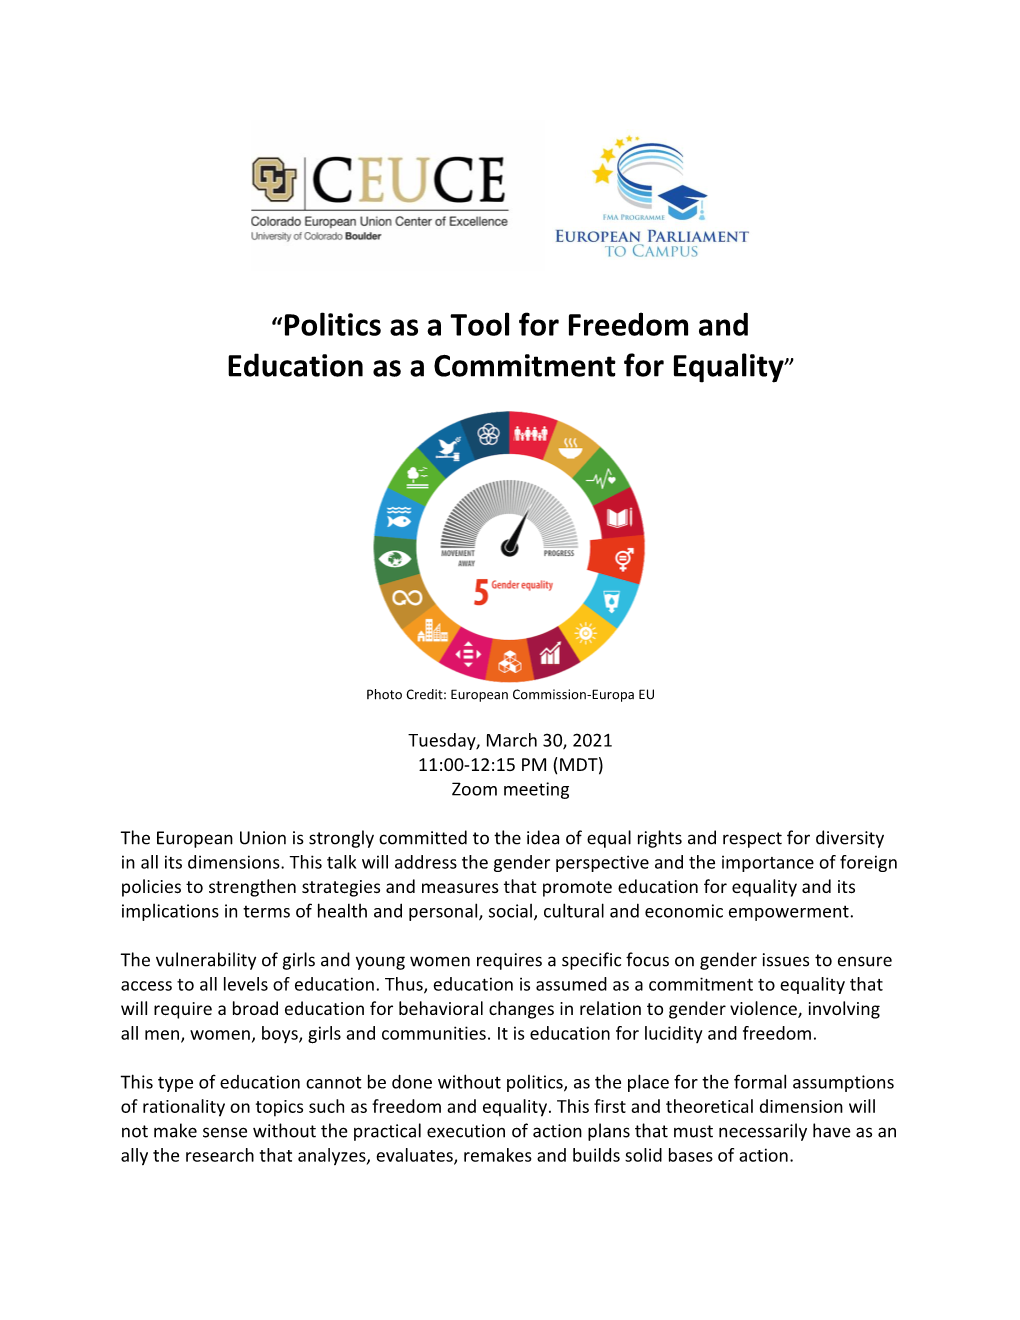 “Politics As a Tool for Freedom and Education As a Commitment for Equality”